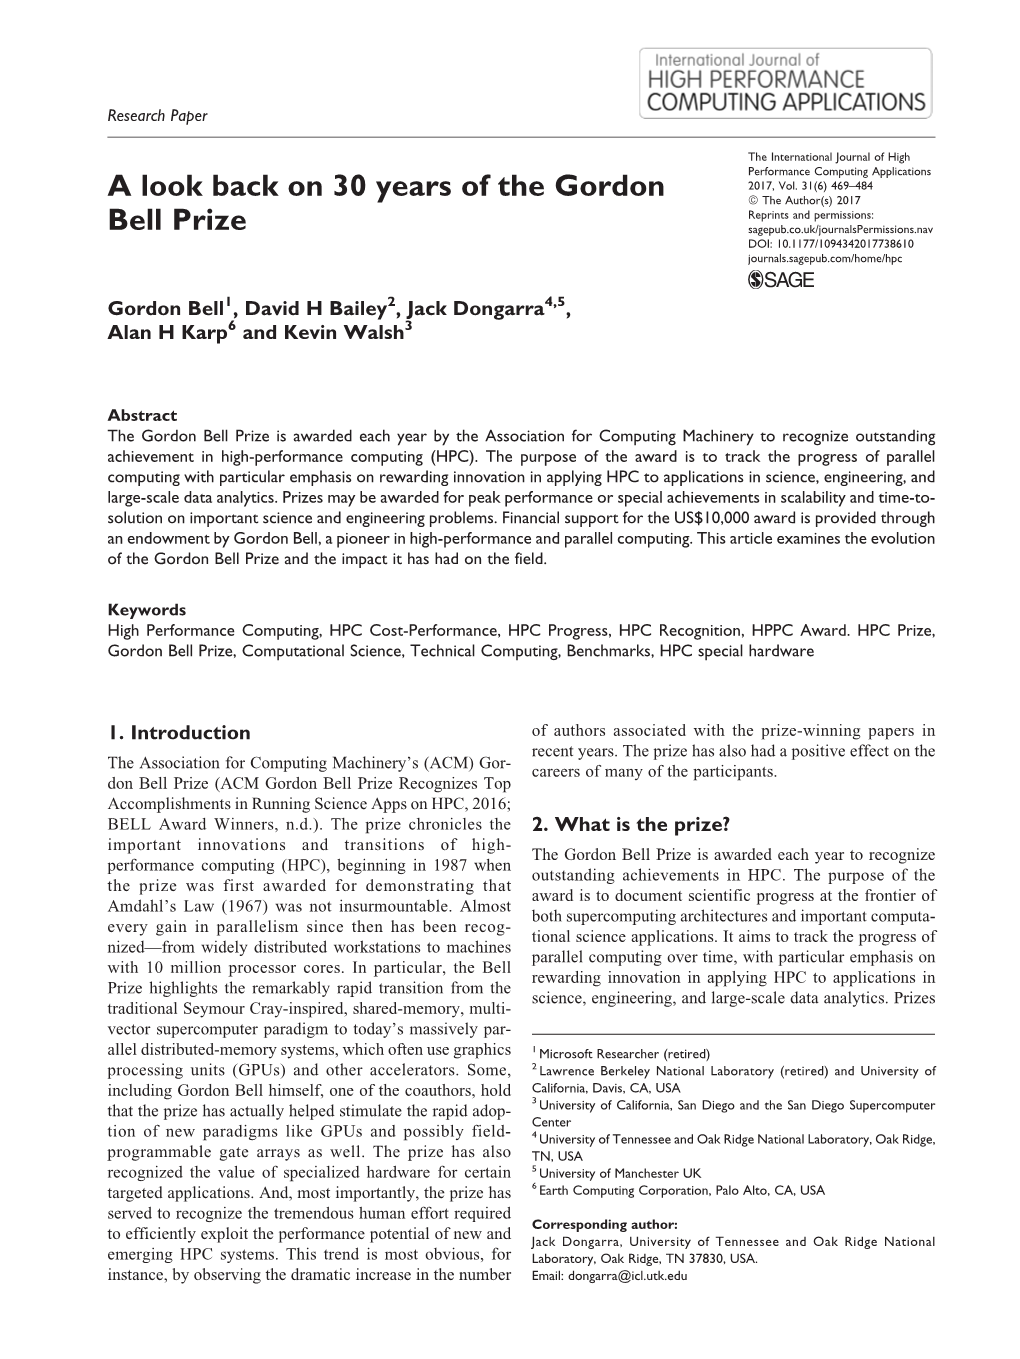 A Look Back on 30 Years of the Gordon Bell Prize